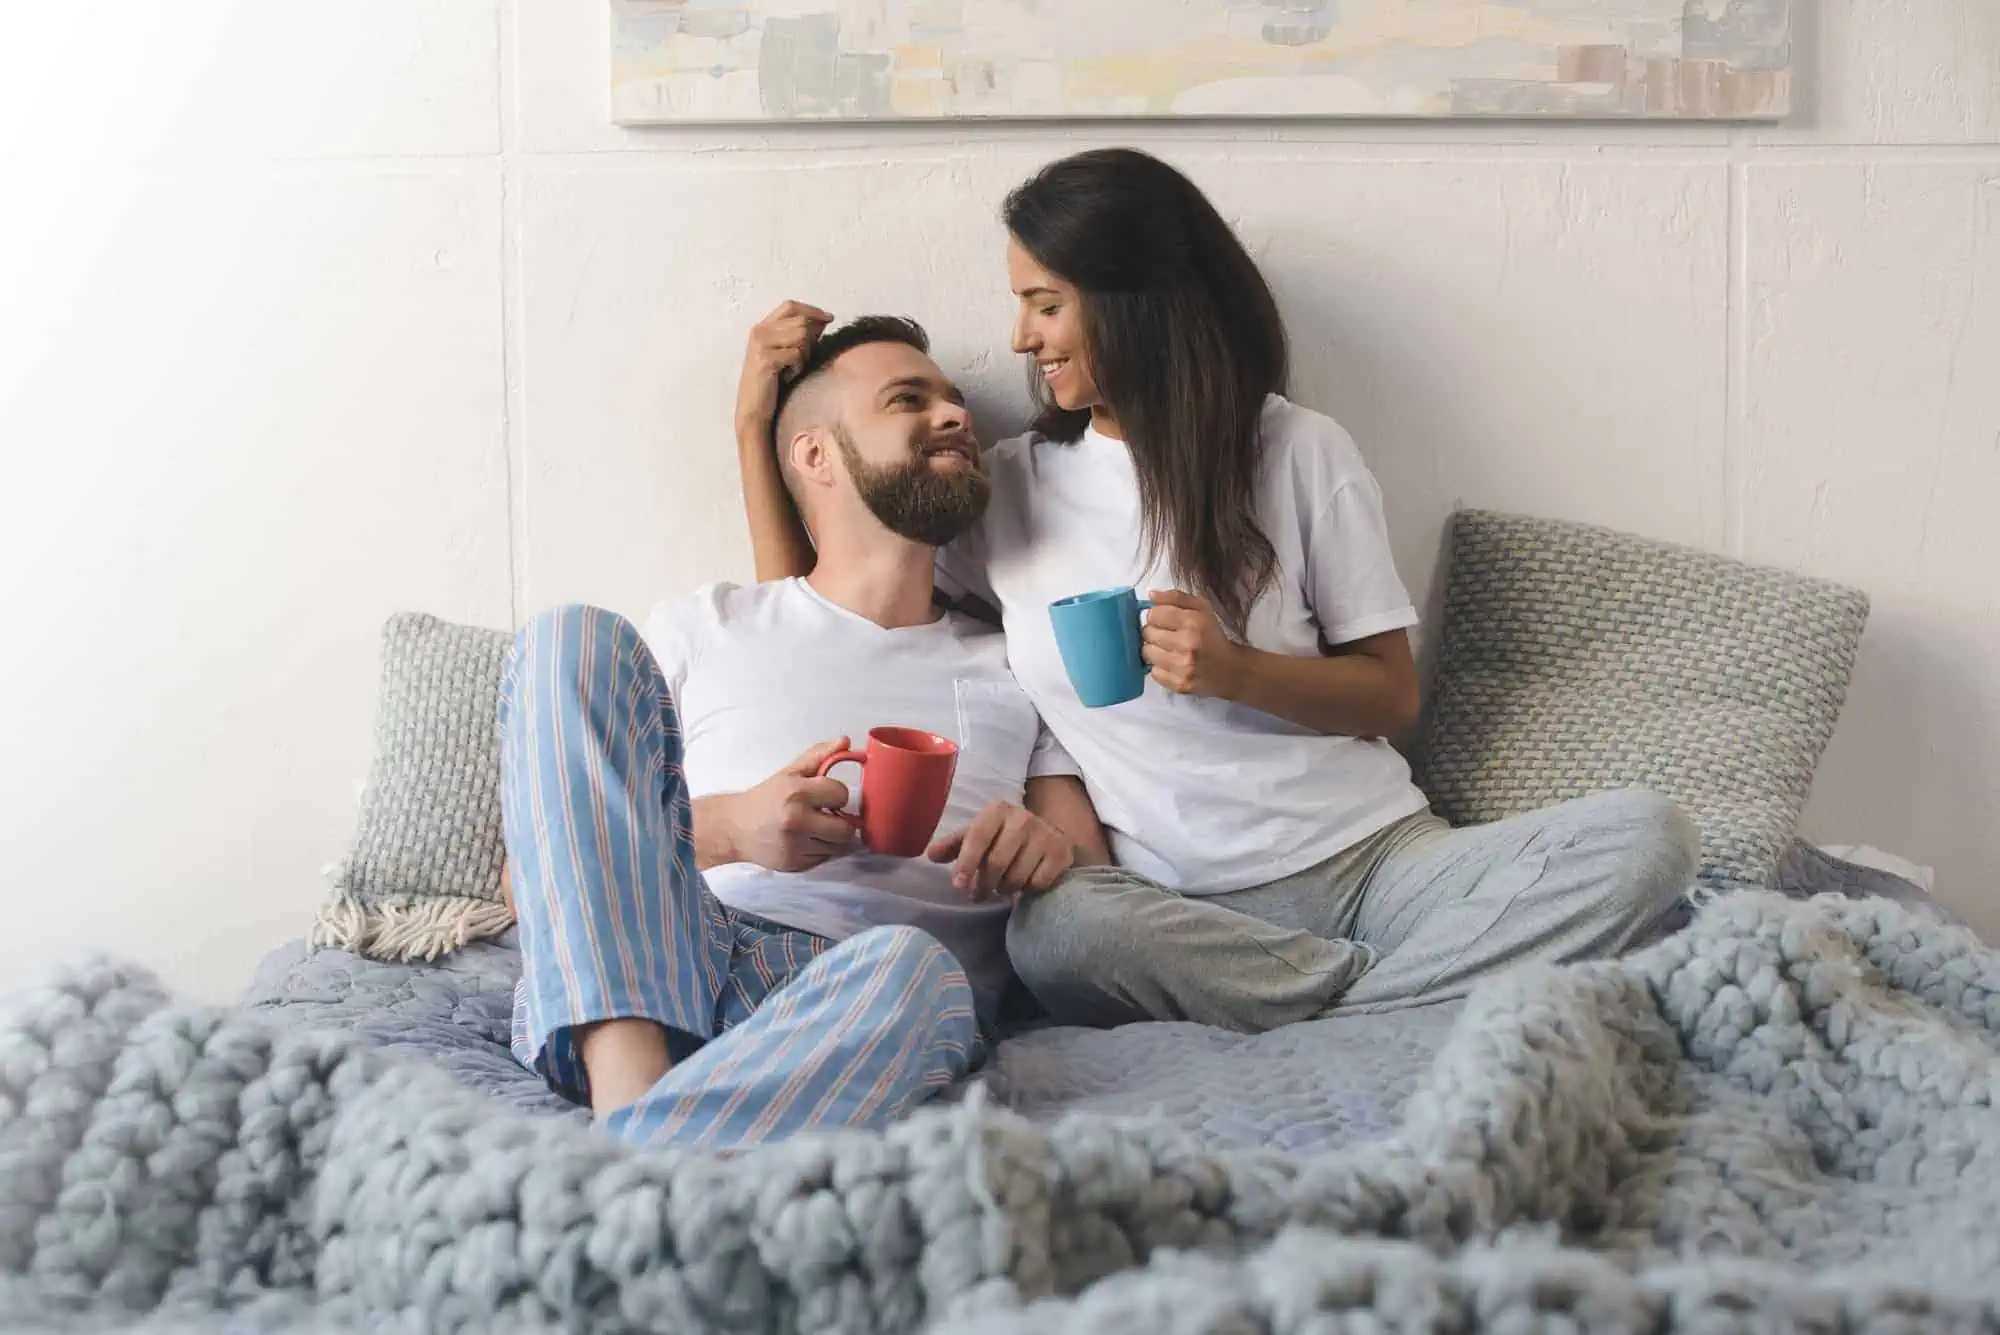 A man and woman sitting on a bed with a cup of coffee